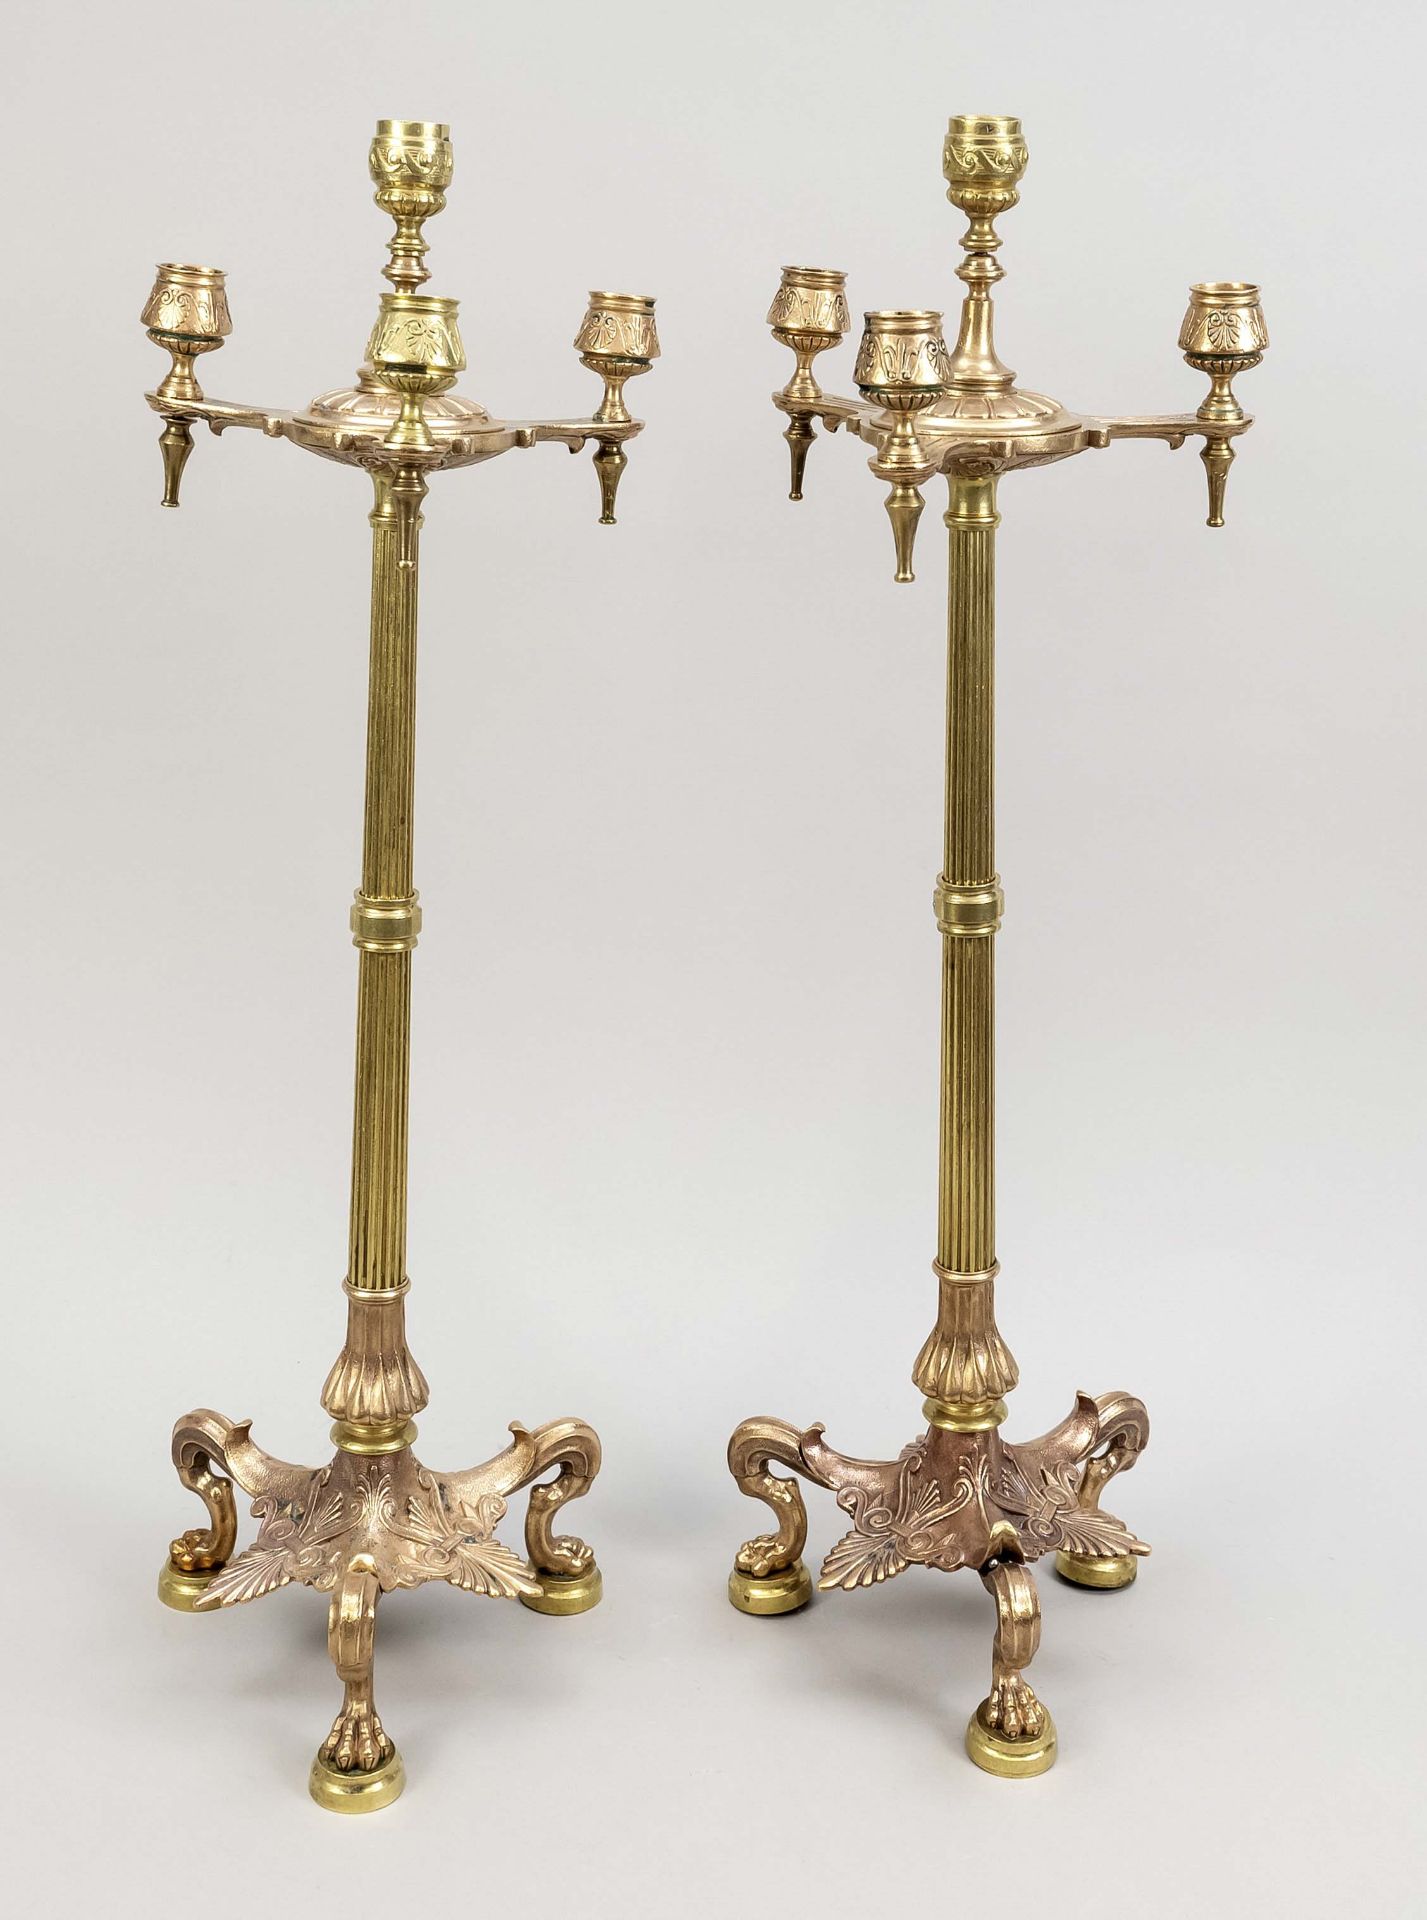 Pair of candlesticks in Etruscan style, 19th/20th c., brass/bronze? partially copper-plated. Three-